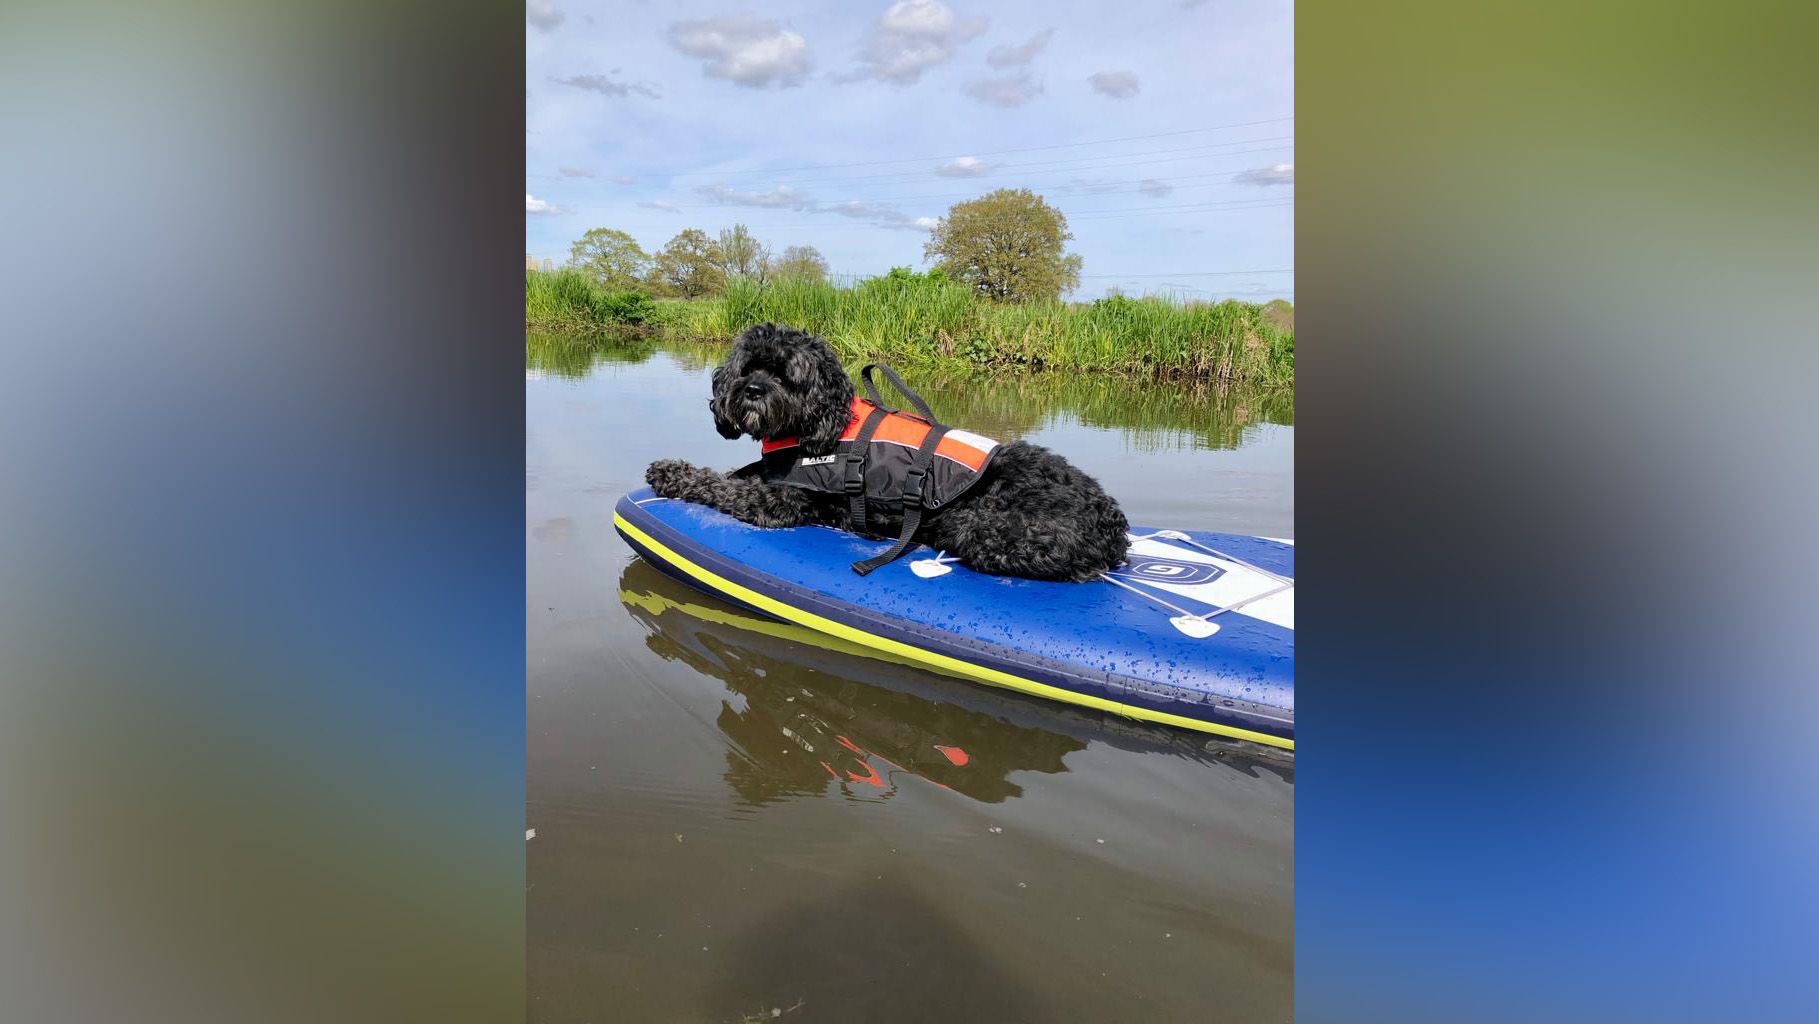 When he's not collecting lost balls, Marlo enjoys paddleboarding.